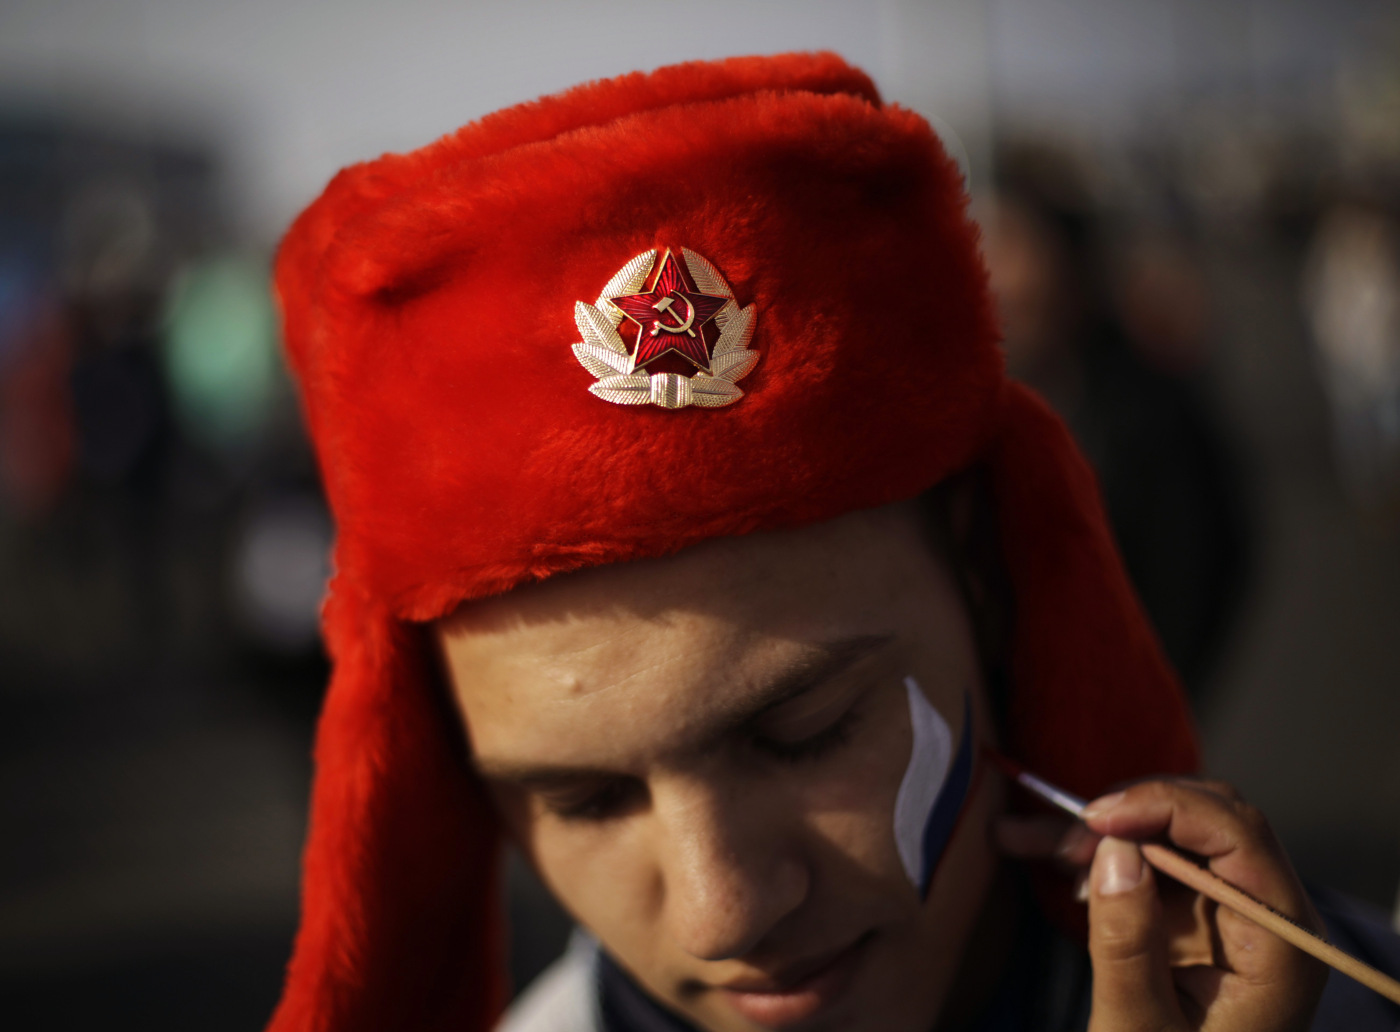 An emblem with the Soviet hammer and sickle decorates the hat of Serdar Yuldashev as he has his face painted in the colors of the Russian flag.